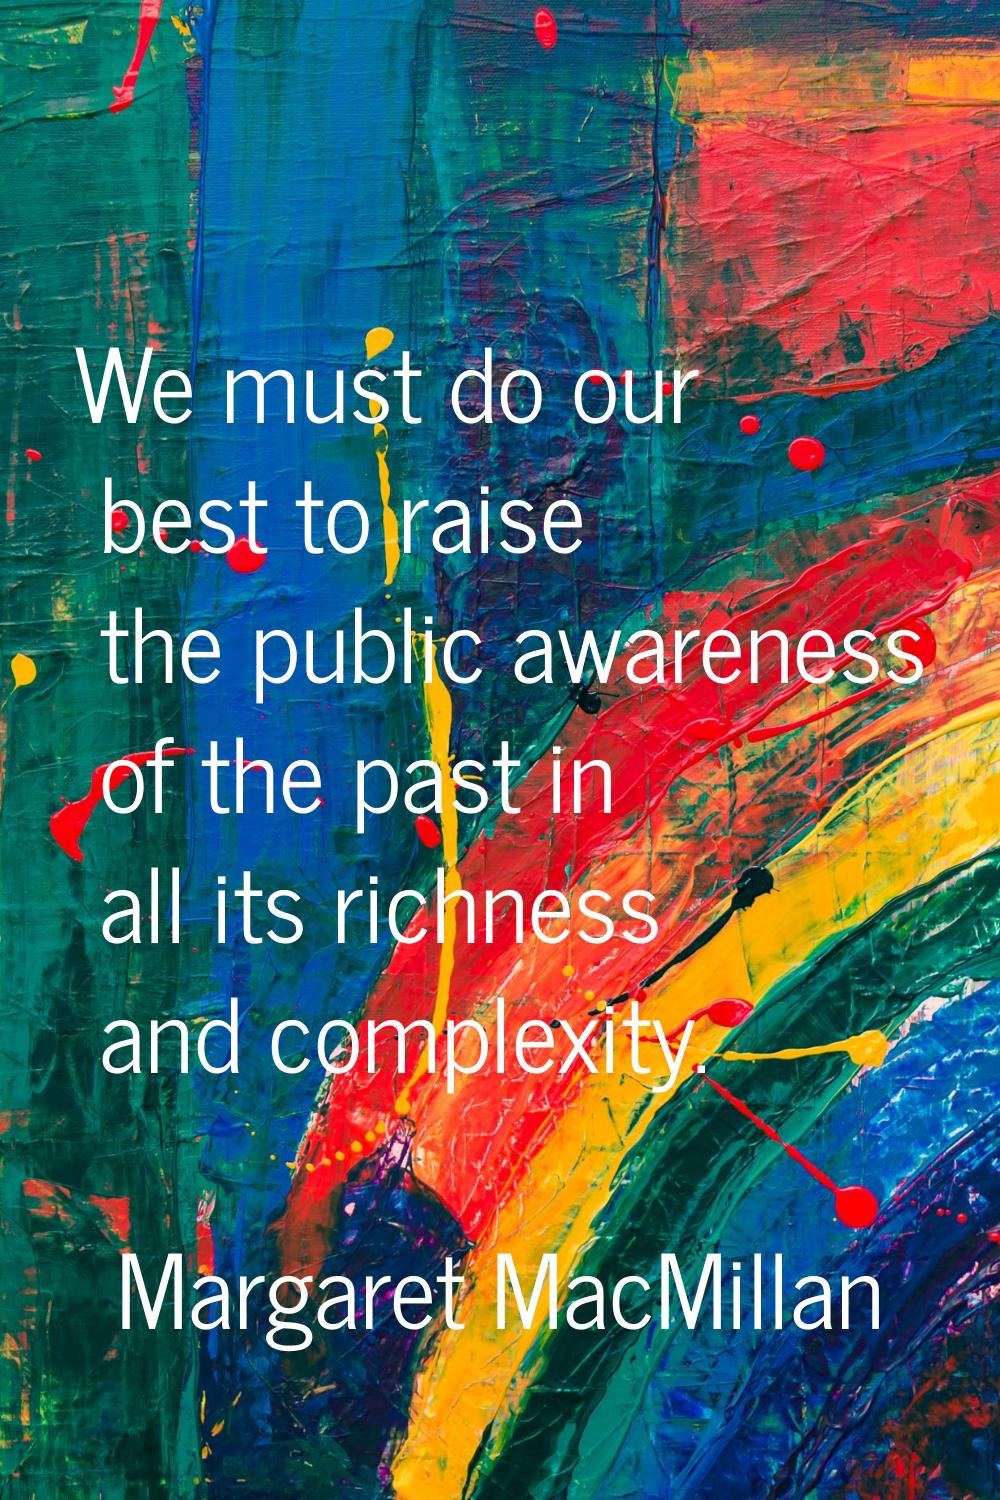 We must do our best to raise the public awareness of the past in all its richness and complexity.